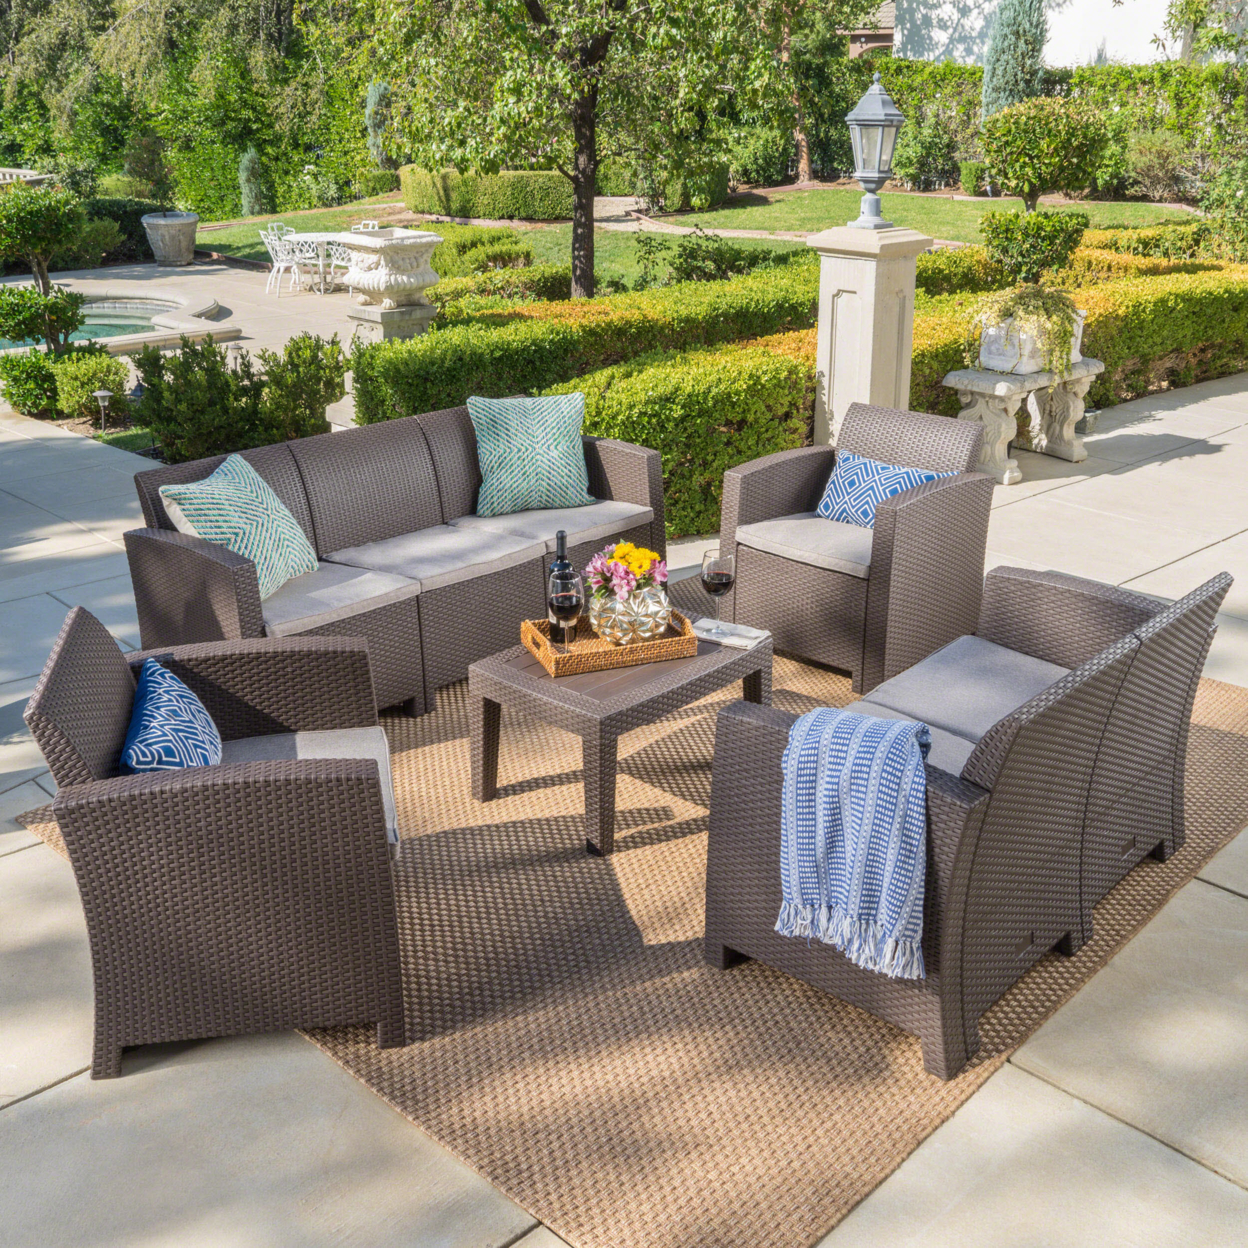 Dayton Outdoor 5 Piece Faux Wicker Rattan Chat Set With Sofa And Water Resistant Cushions - Charcoal/Light Gray